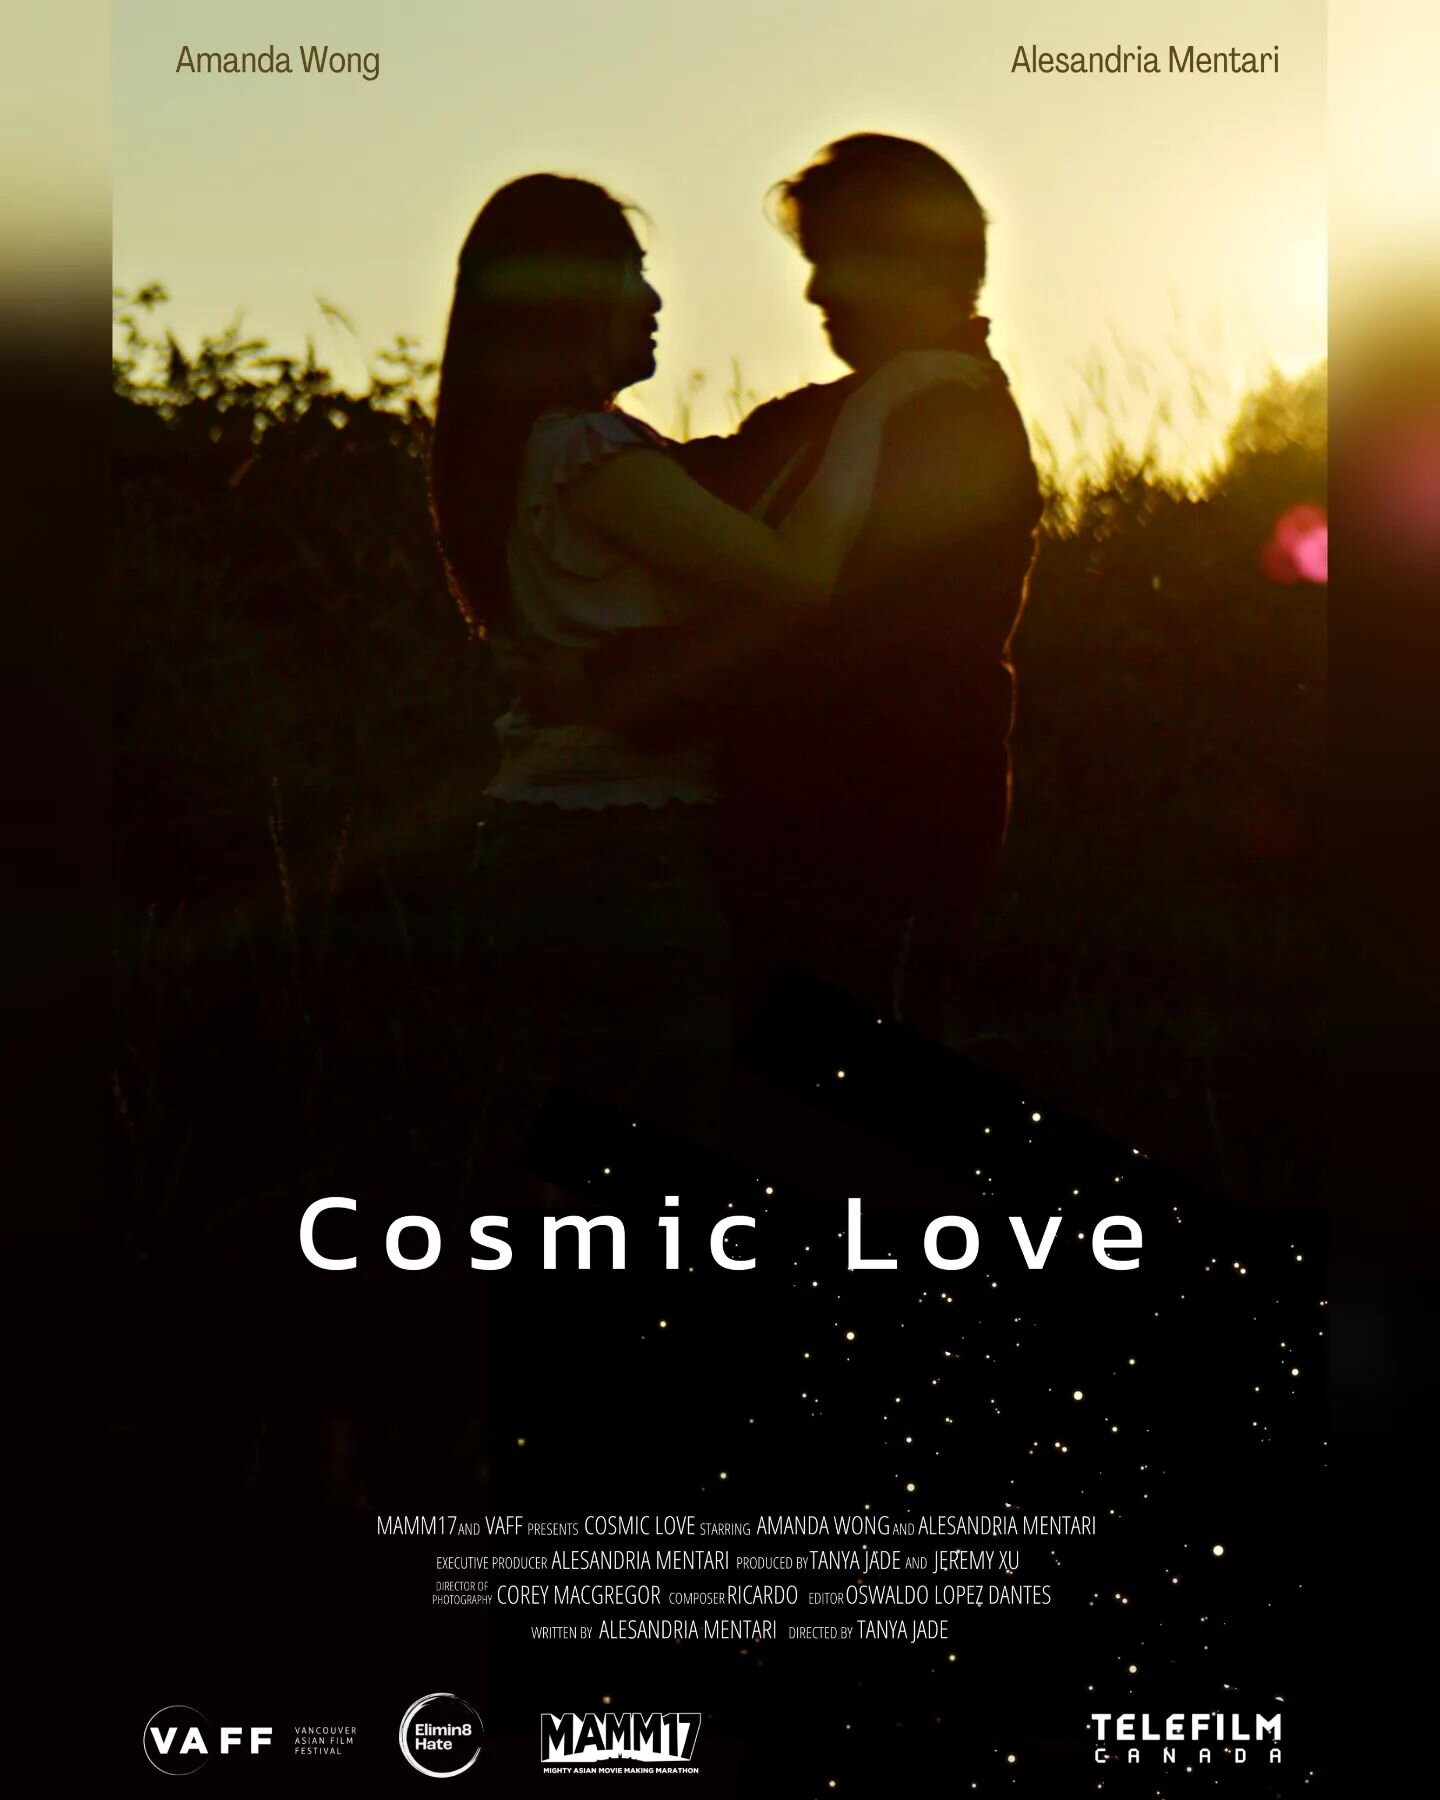 Very proud of our film Cosmic Love being so well received at MAMM17 last night! Thank you @vaffvancouver and @telefilm_canada for having us!
.
Writer &amp; EP @alesandriamusing 
Director @tanyajadeism 
Producers @tanyajadeism @jeremyxu_ 
DP @coreymac